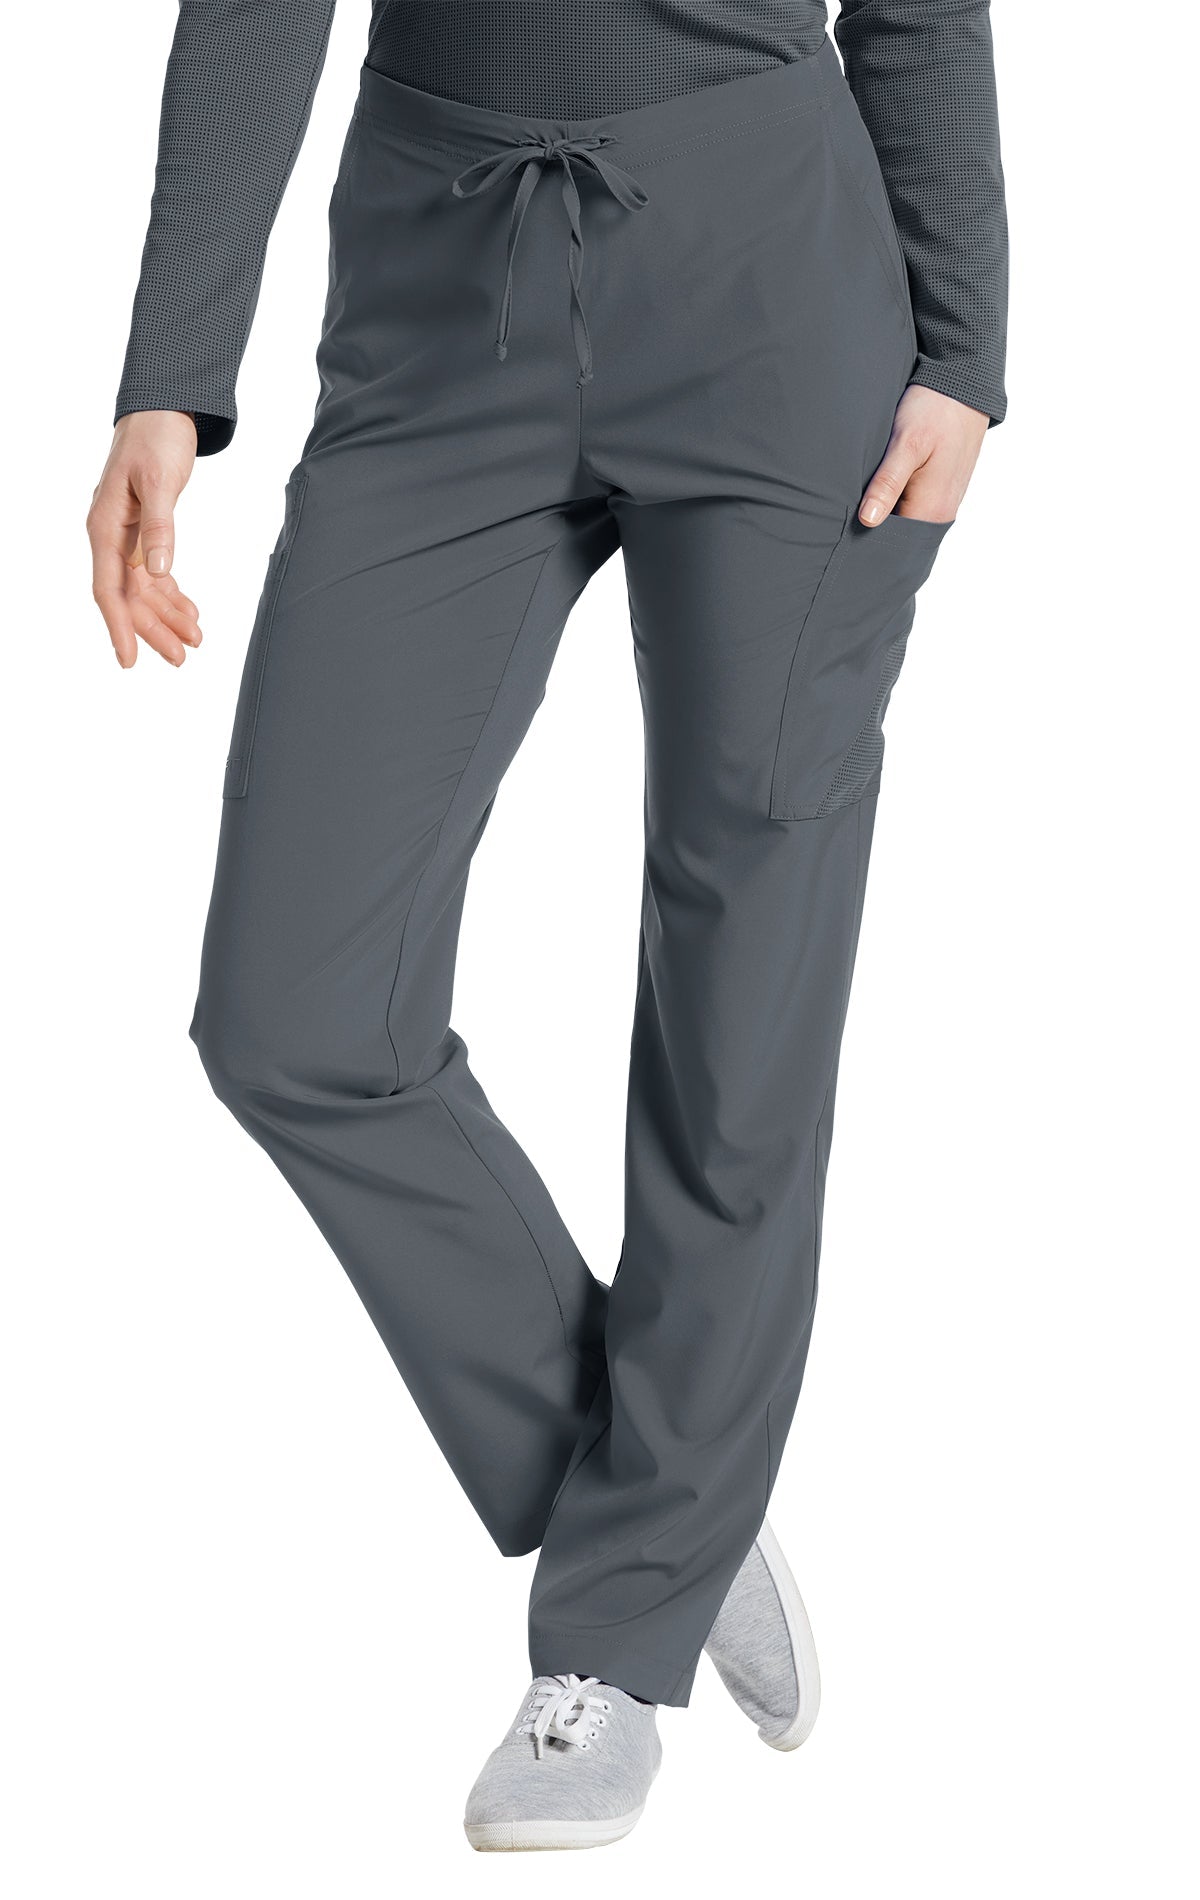 Pewter - White Cross Fit Cargo Pocket Pant